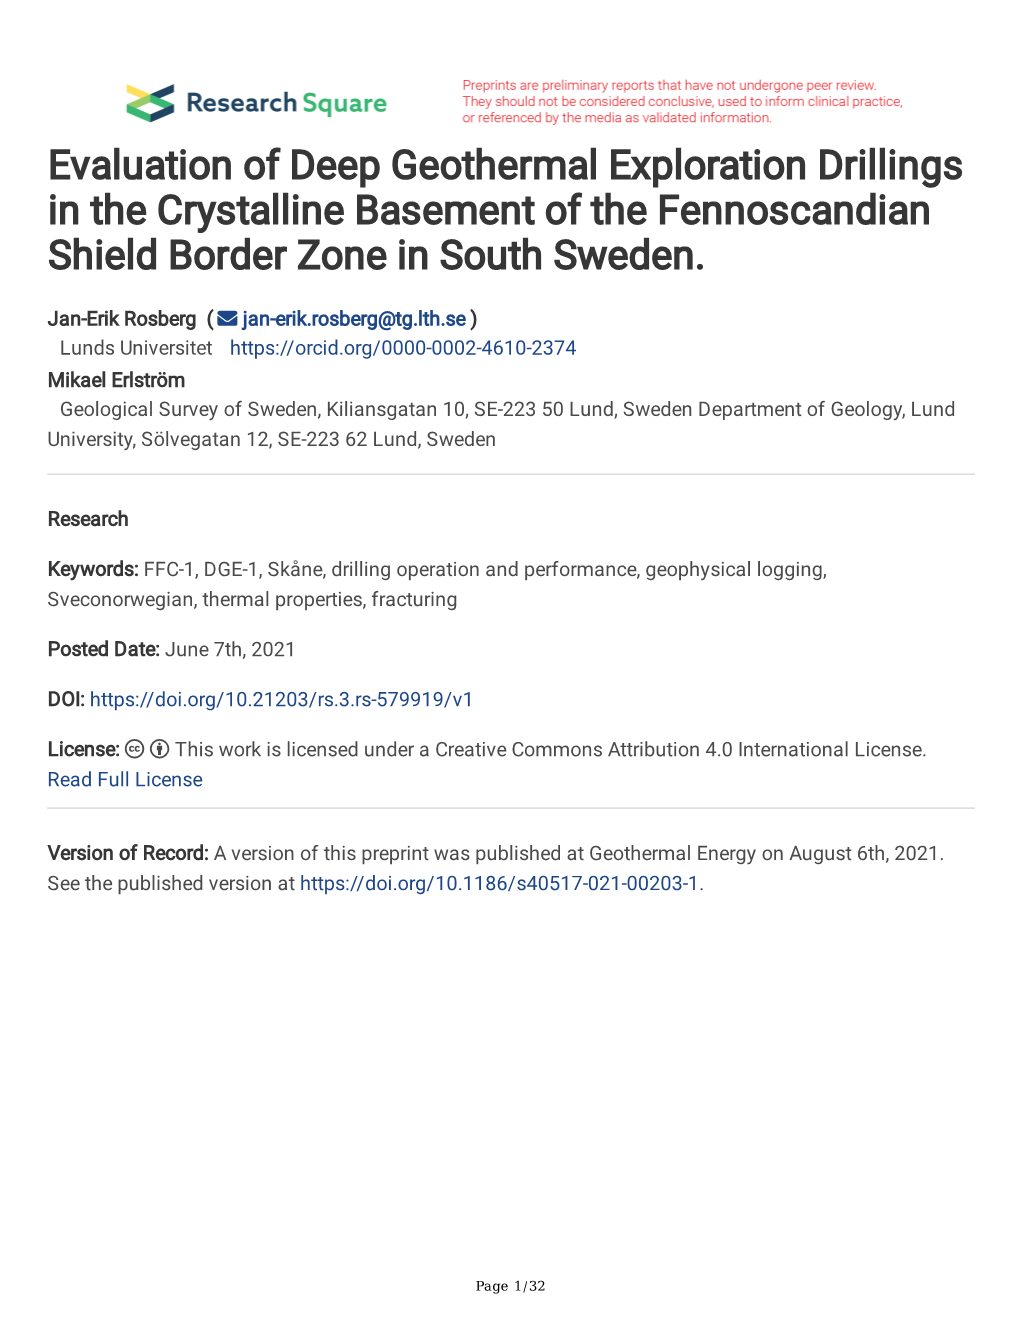 Evaluation of Deep Geothermal Exploration Drillings in the Crystalline Basement of the Fennoscandian Shield Border Zone in South Sweden